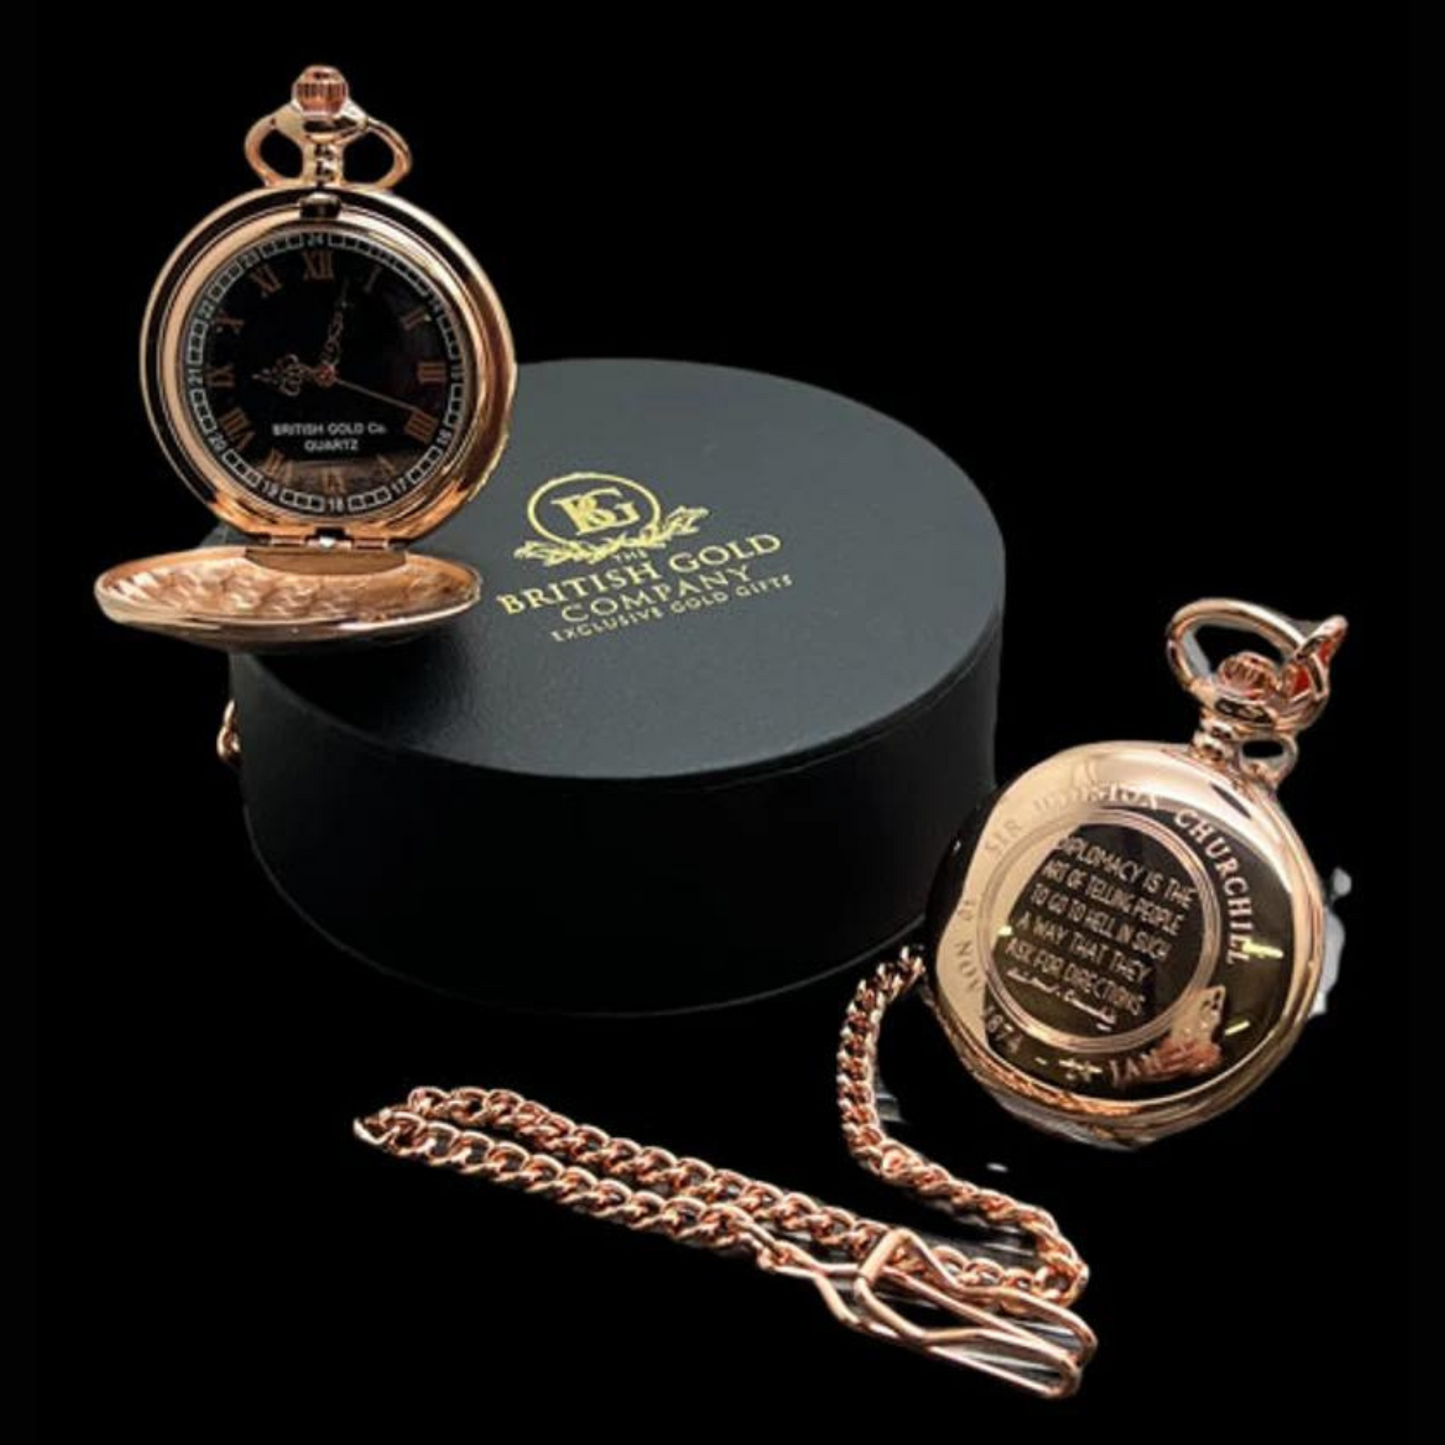 Winston Churchill Personalised Engraved Pocket Watch